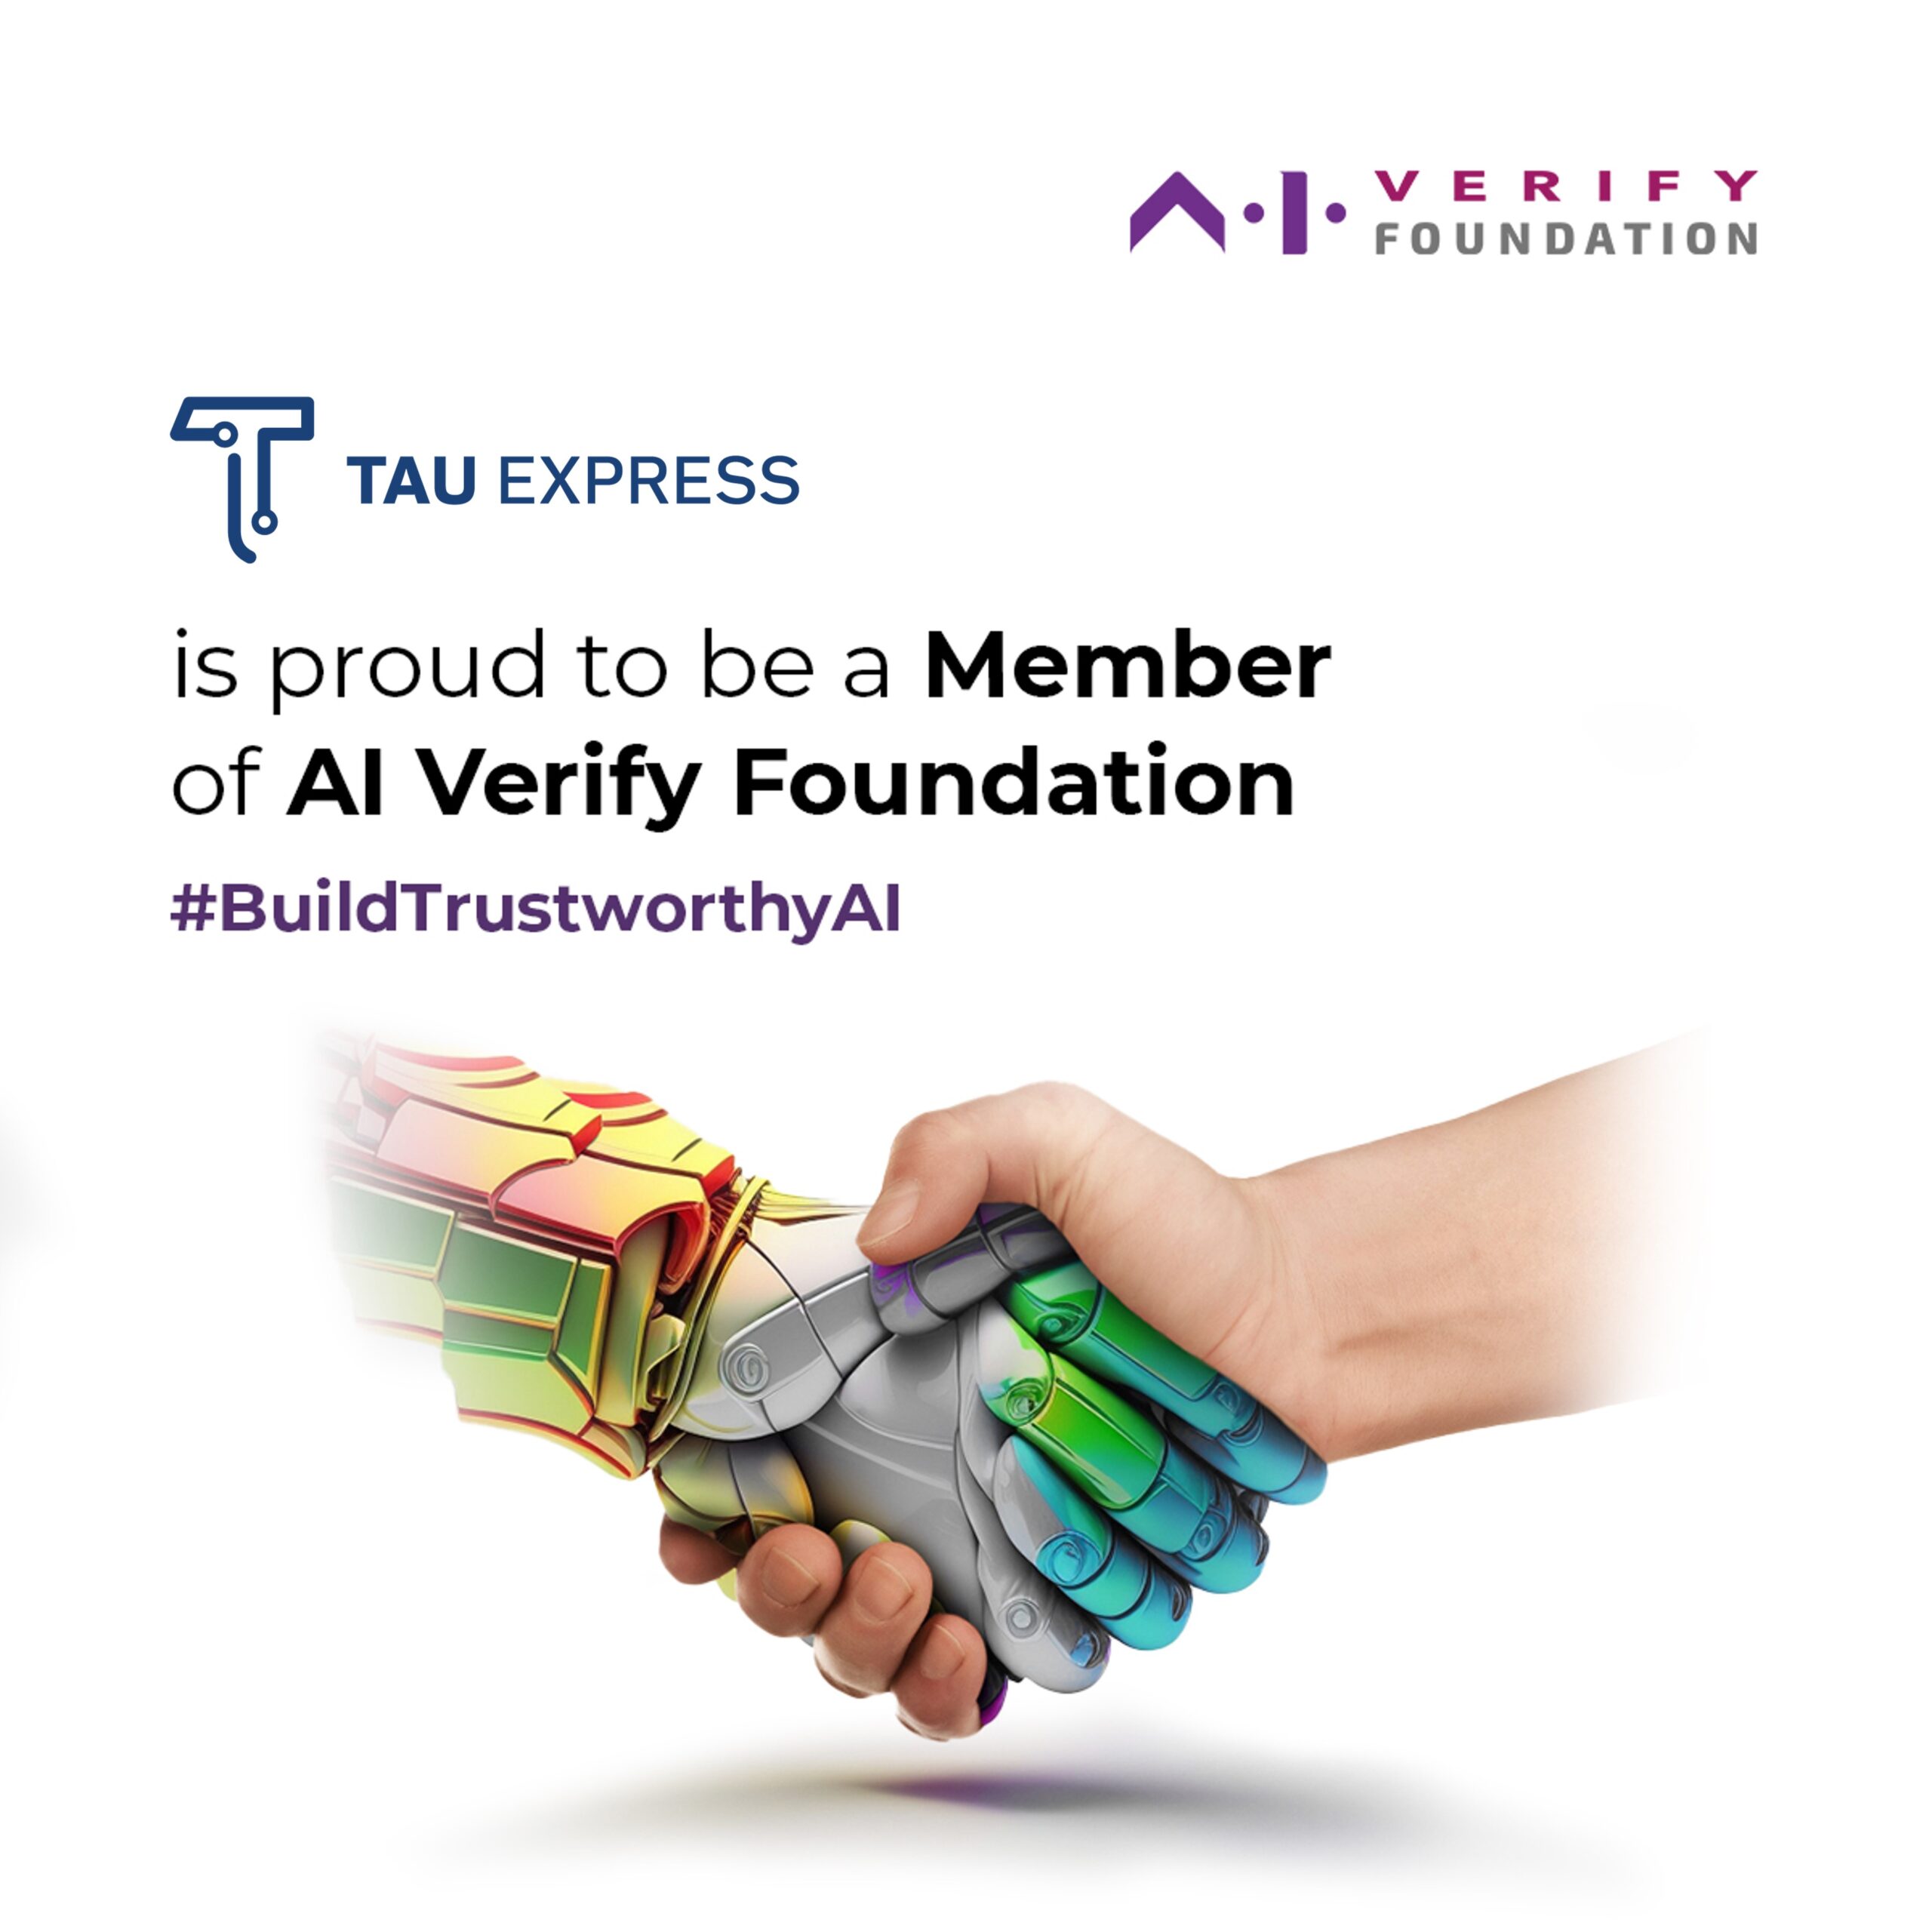 TAU Express joins A.I. Verify Foundation to enable development and deployment of trustworthy AI